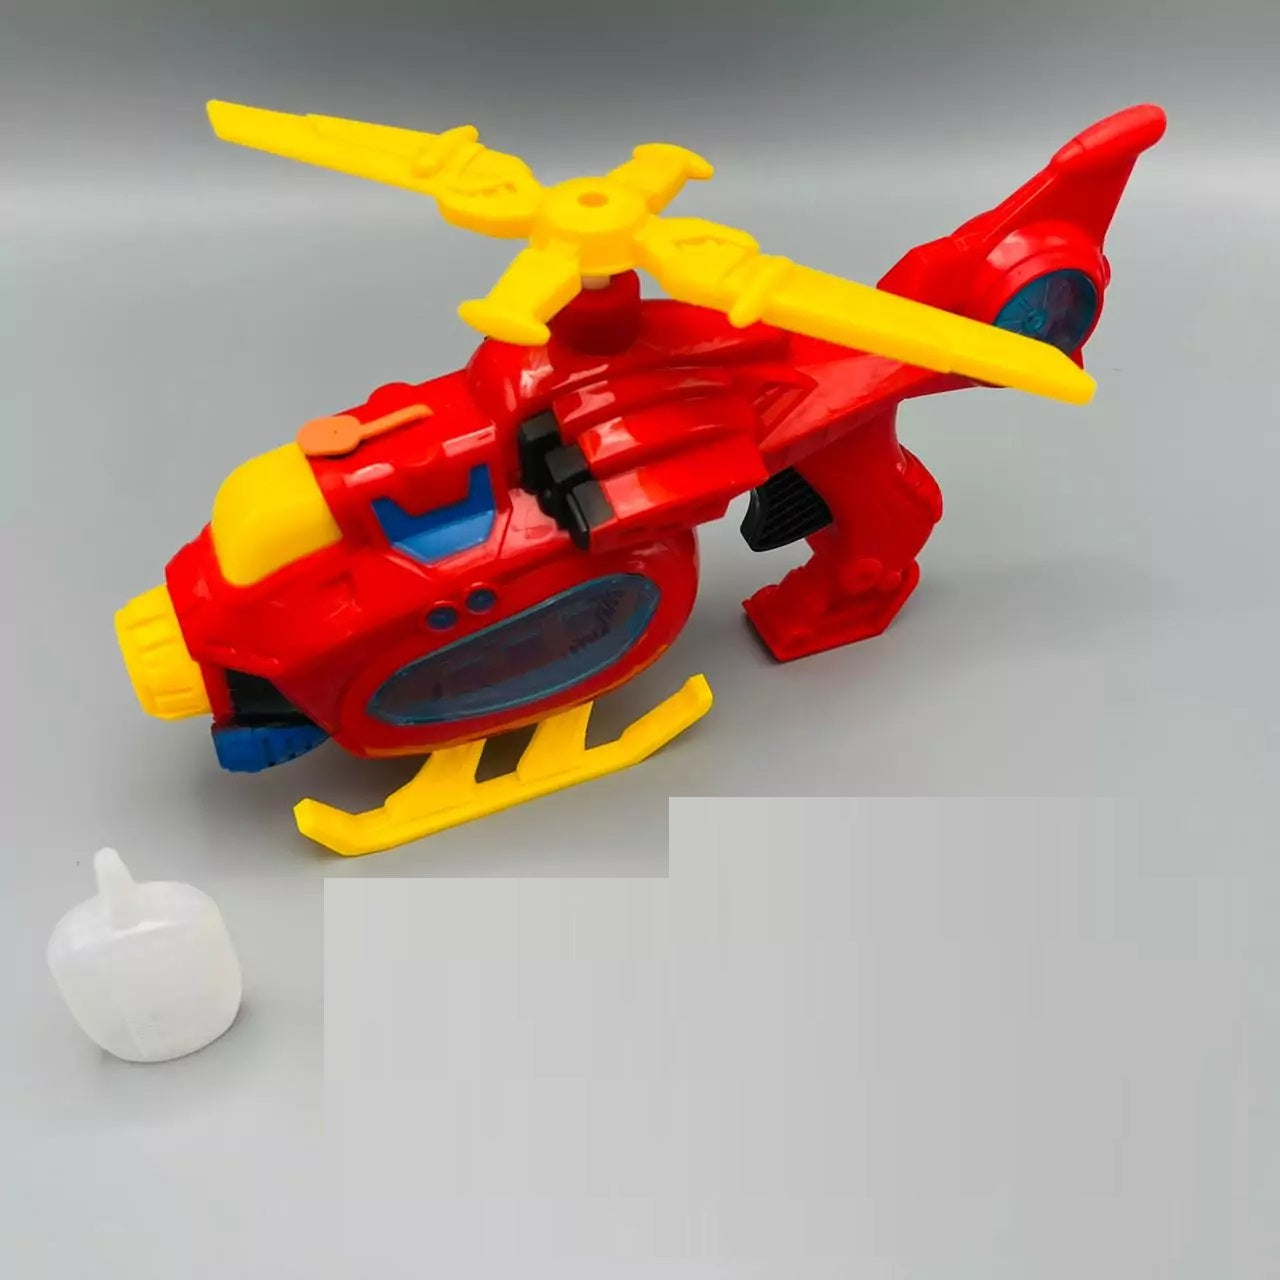 Spray Helicopter Gun with Lights and Sound for Kids